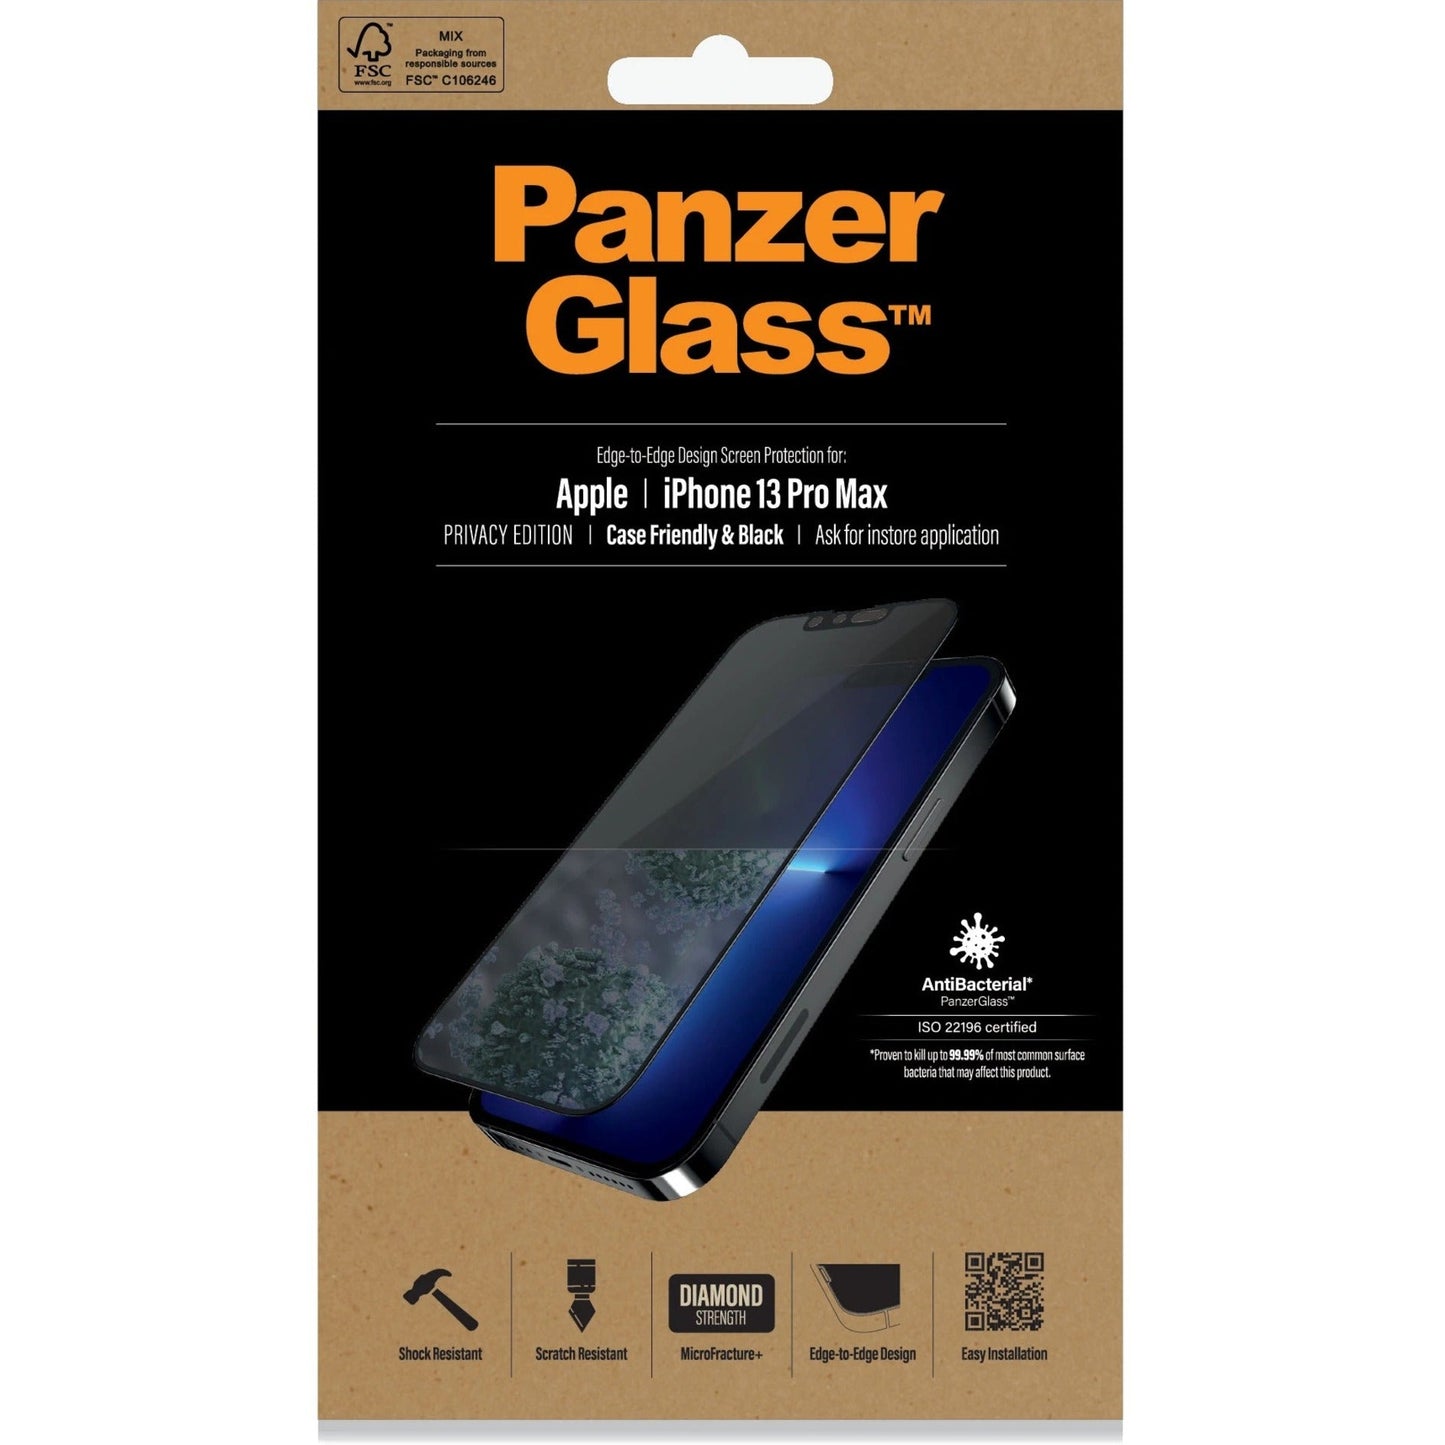 PanzerGlass iPhone 13 Pro Max - Black - Privacy Black Crystal Clear